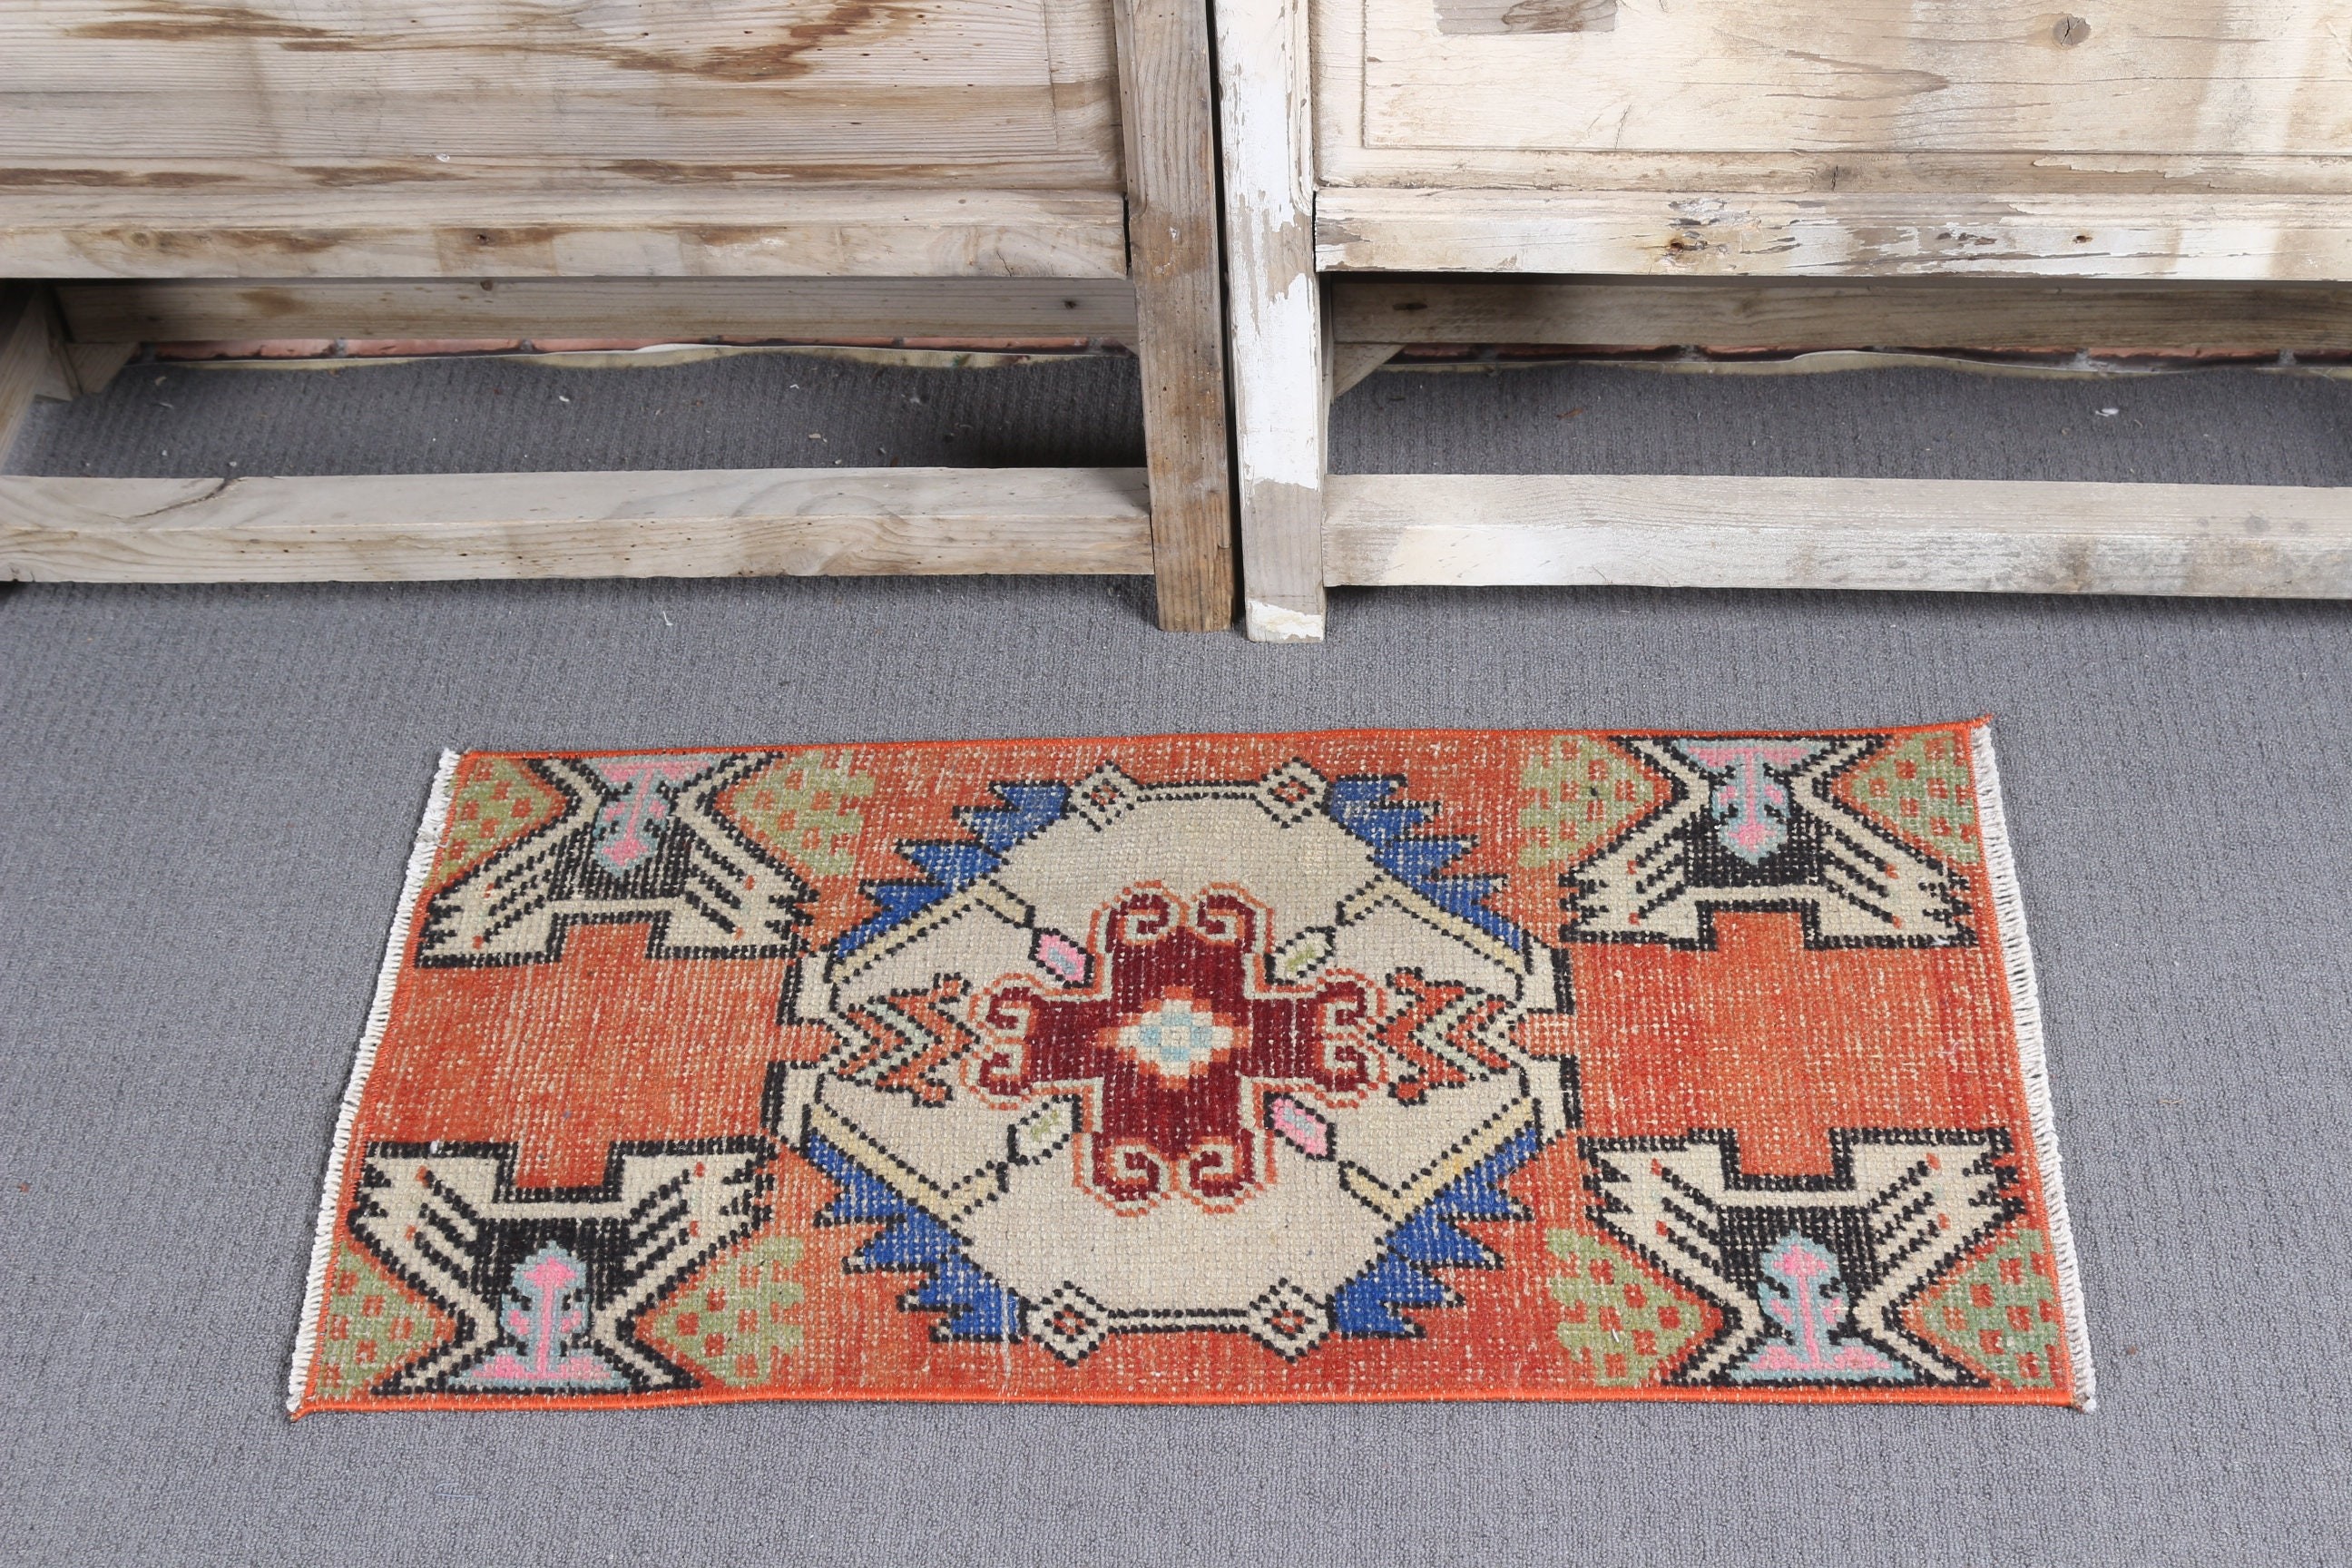 Rugs for Wall Hanging, 1.4x2.7 ft Small Rug, Kitchen Rug, Home Decor Rugs, Turkish Rug, Entry Rugs, Vintage Rugs, Orange Bedroom Rug